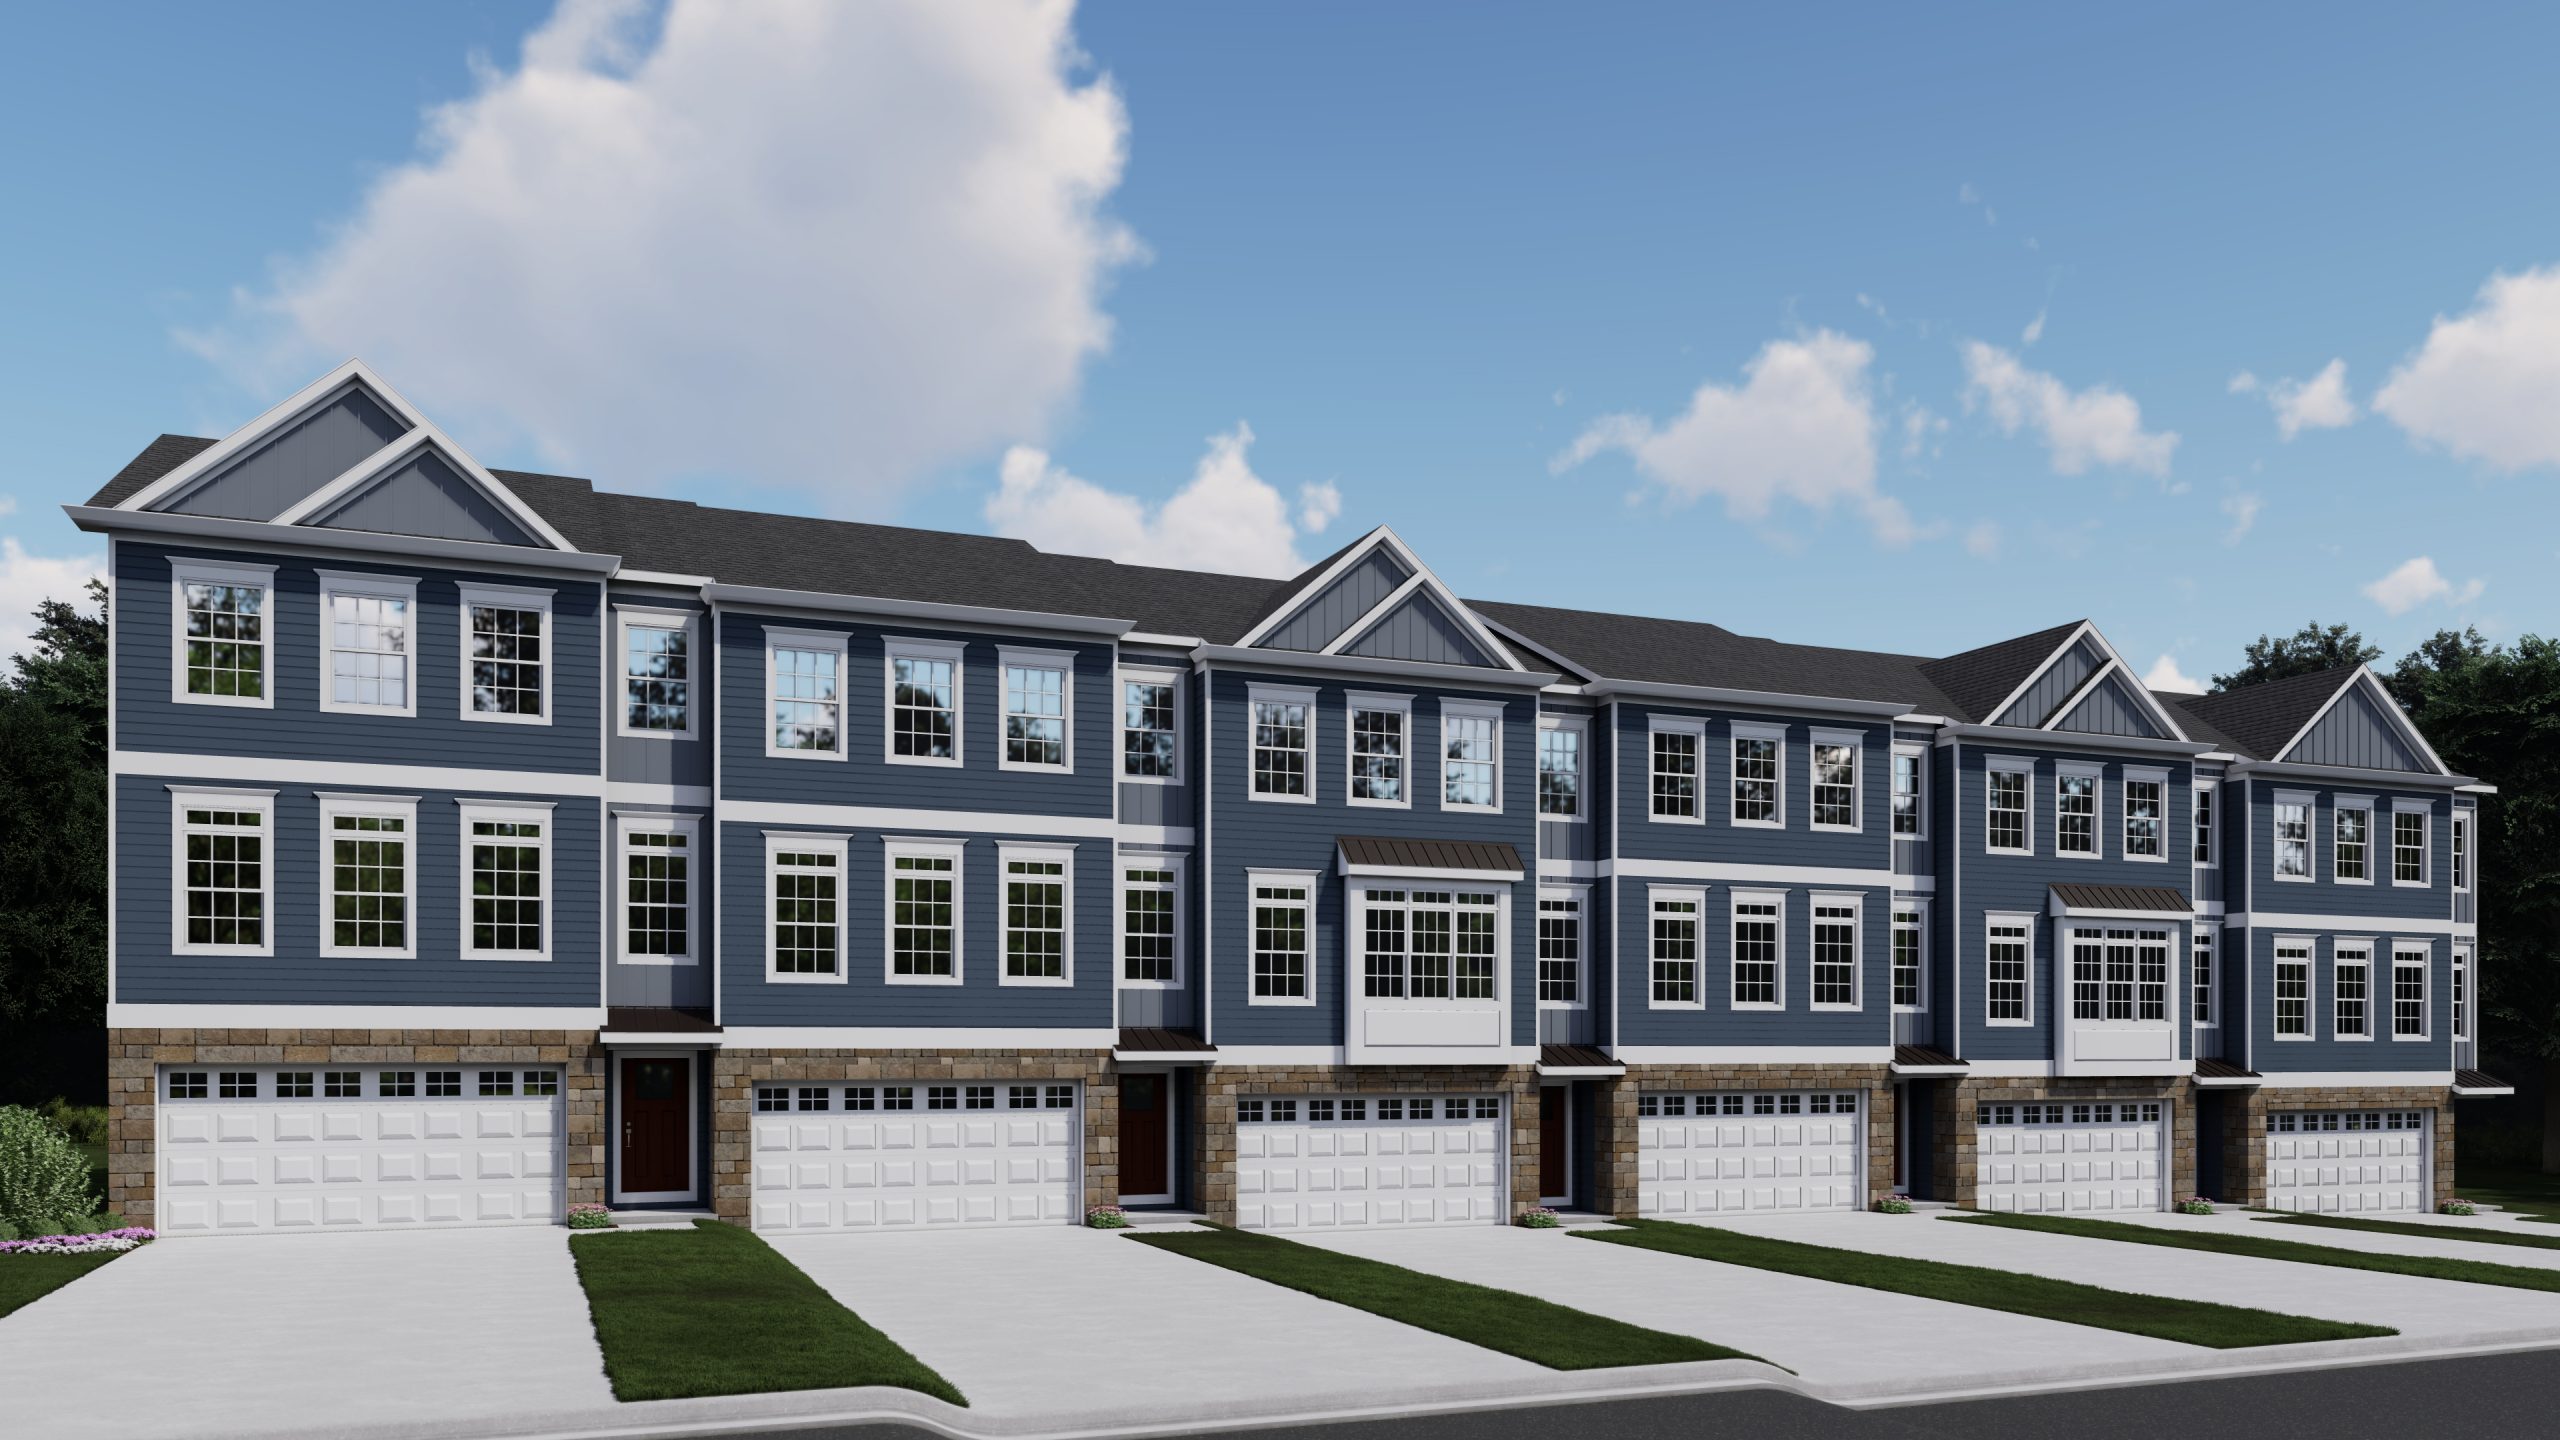 3-story Alexendria Townhome front exterior rendering